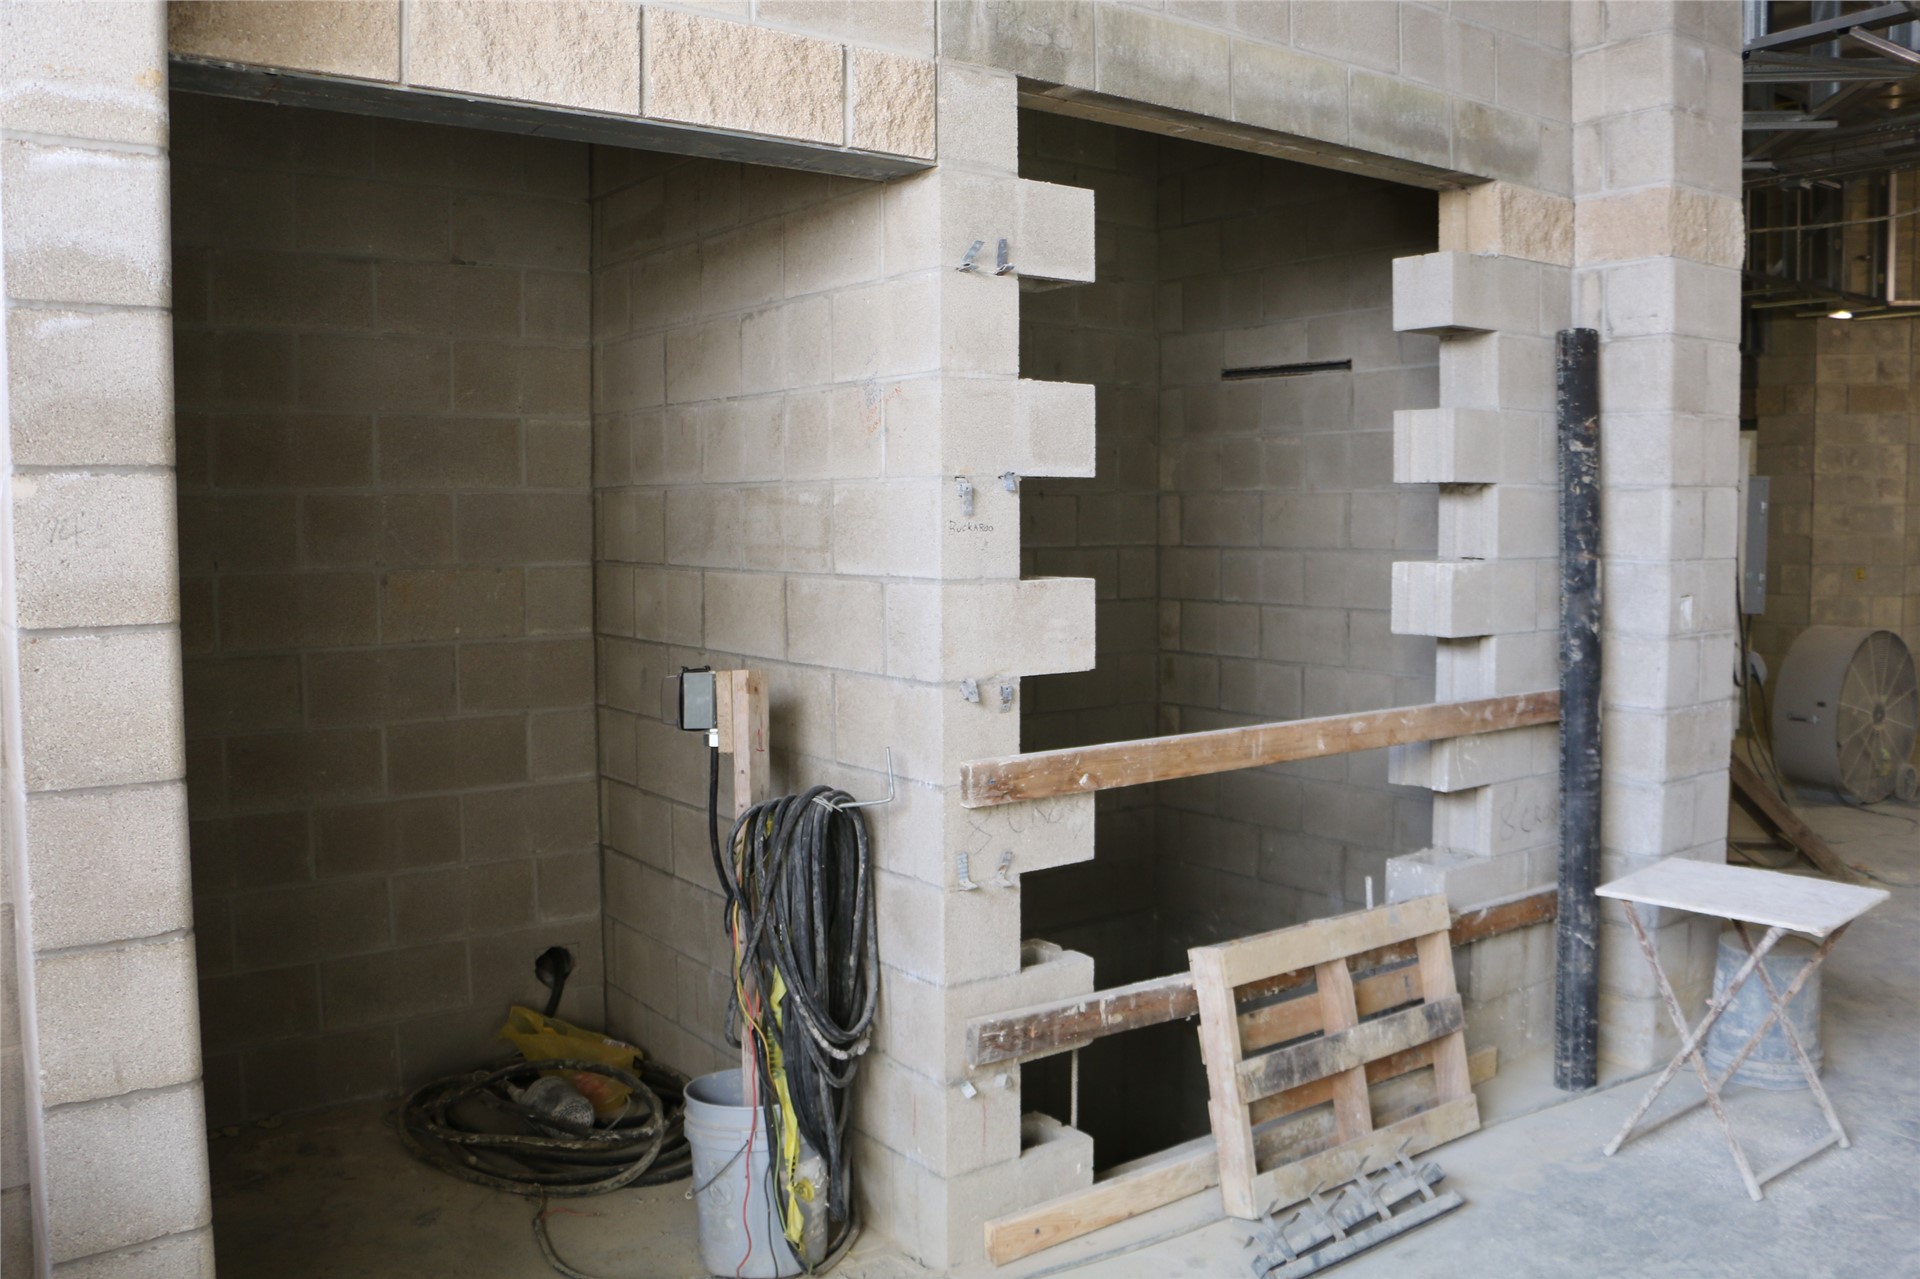 Women’s restroom and elevator shaft at the south end of academics wing